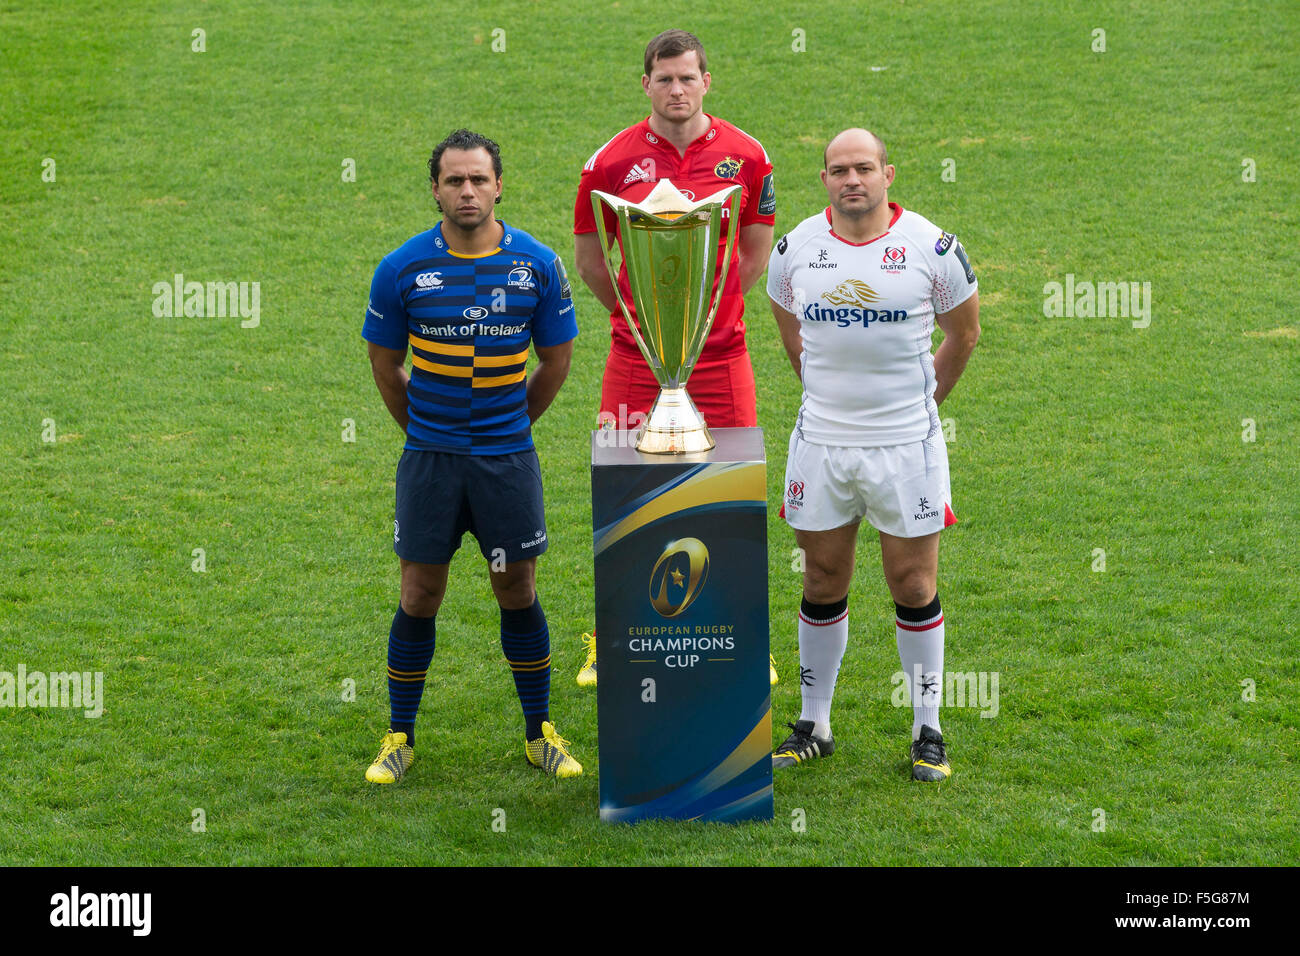 Twickenham Stoop, London, UK. 04th Nov, 2015. European Rugby Champions Cup media launch. Irish PRO12 team captains pose with the Champions Cup trophy at Twickenham Stoop. (l-r: Leinster's Isa Nacewa, Munster's Denis Hurley, Ulster's Rory Best) Credit:  Action Plus Sports/Alamy Live News Stock Photo